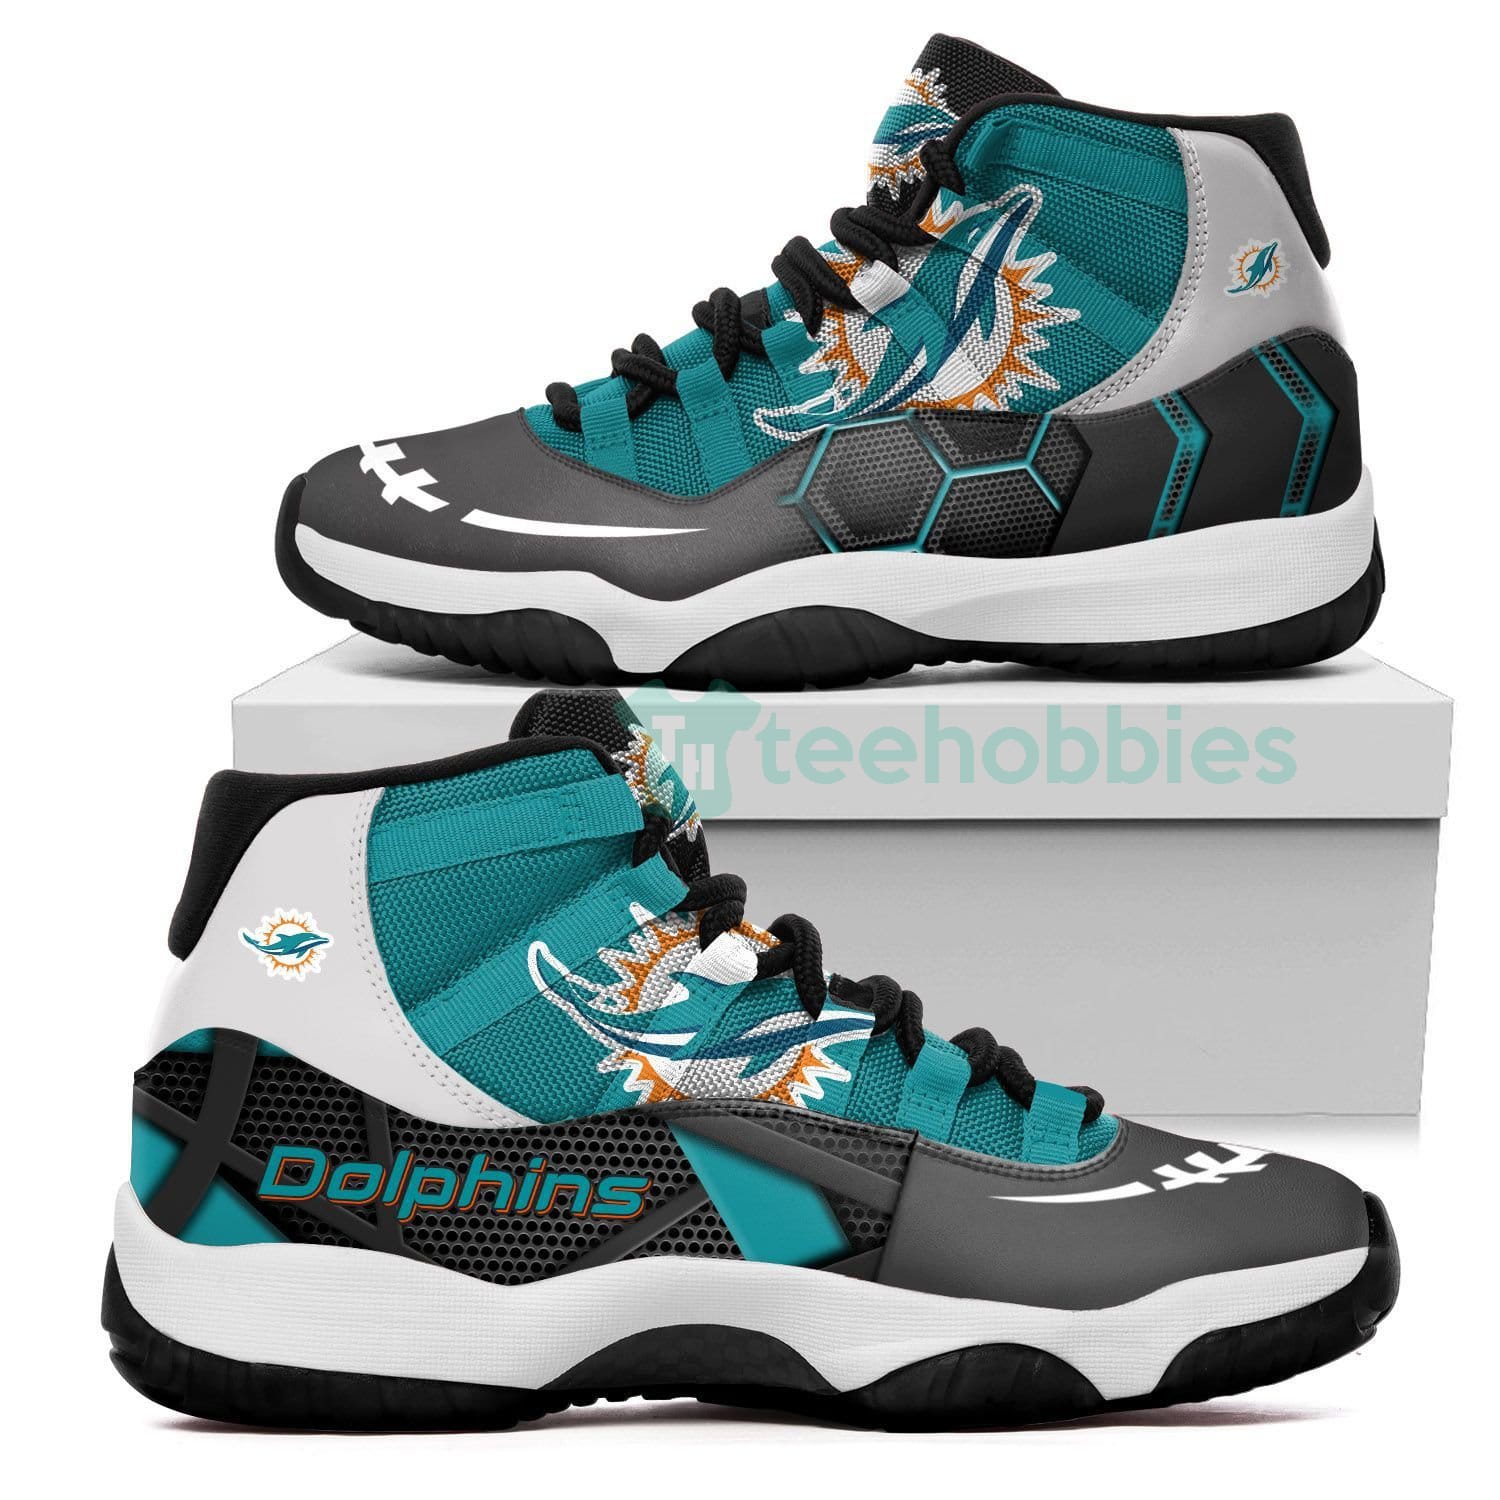 Miami Dolphins New Air Jordan 11 Shoes Gift